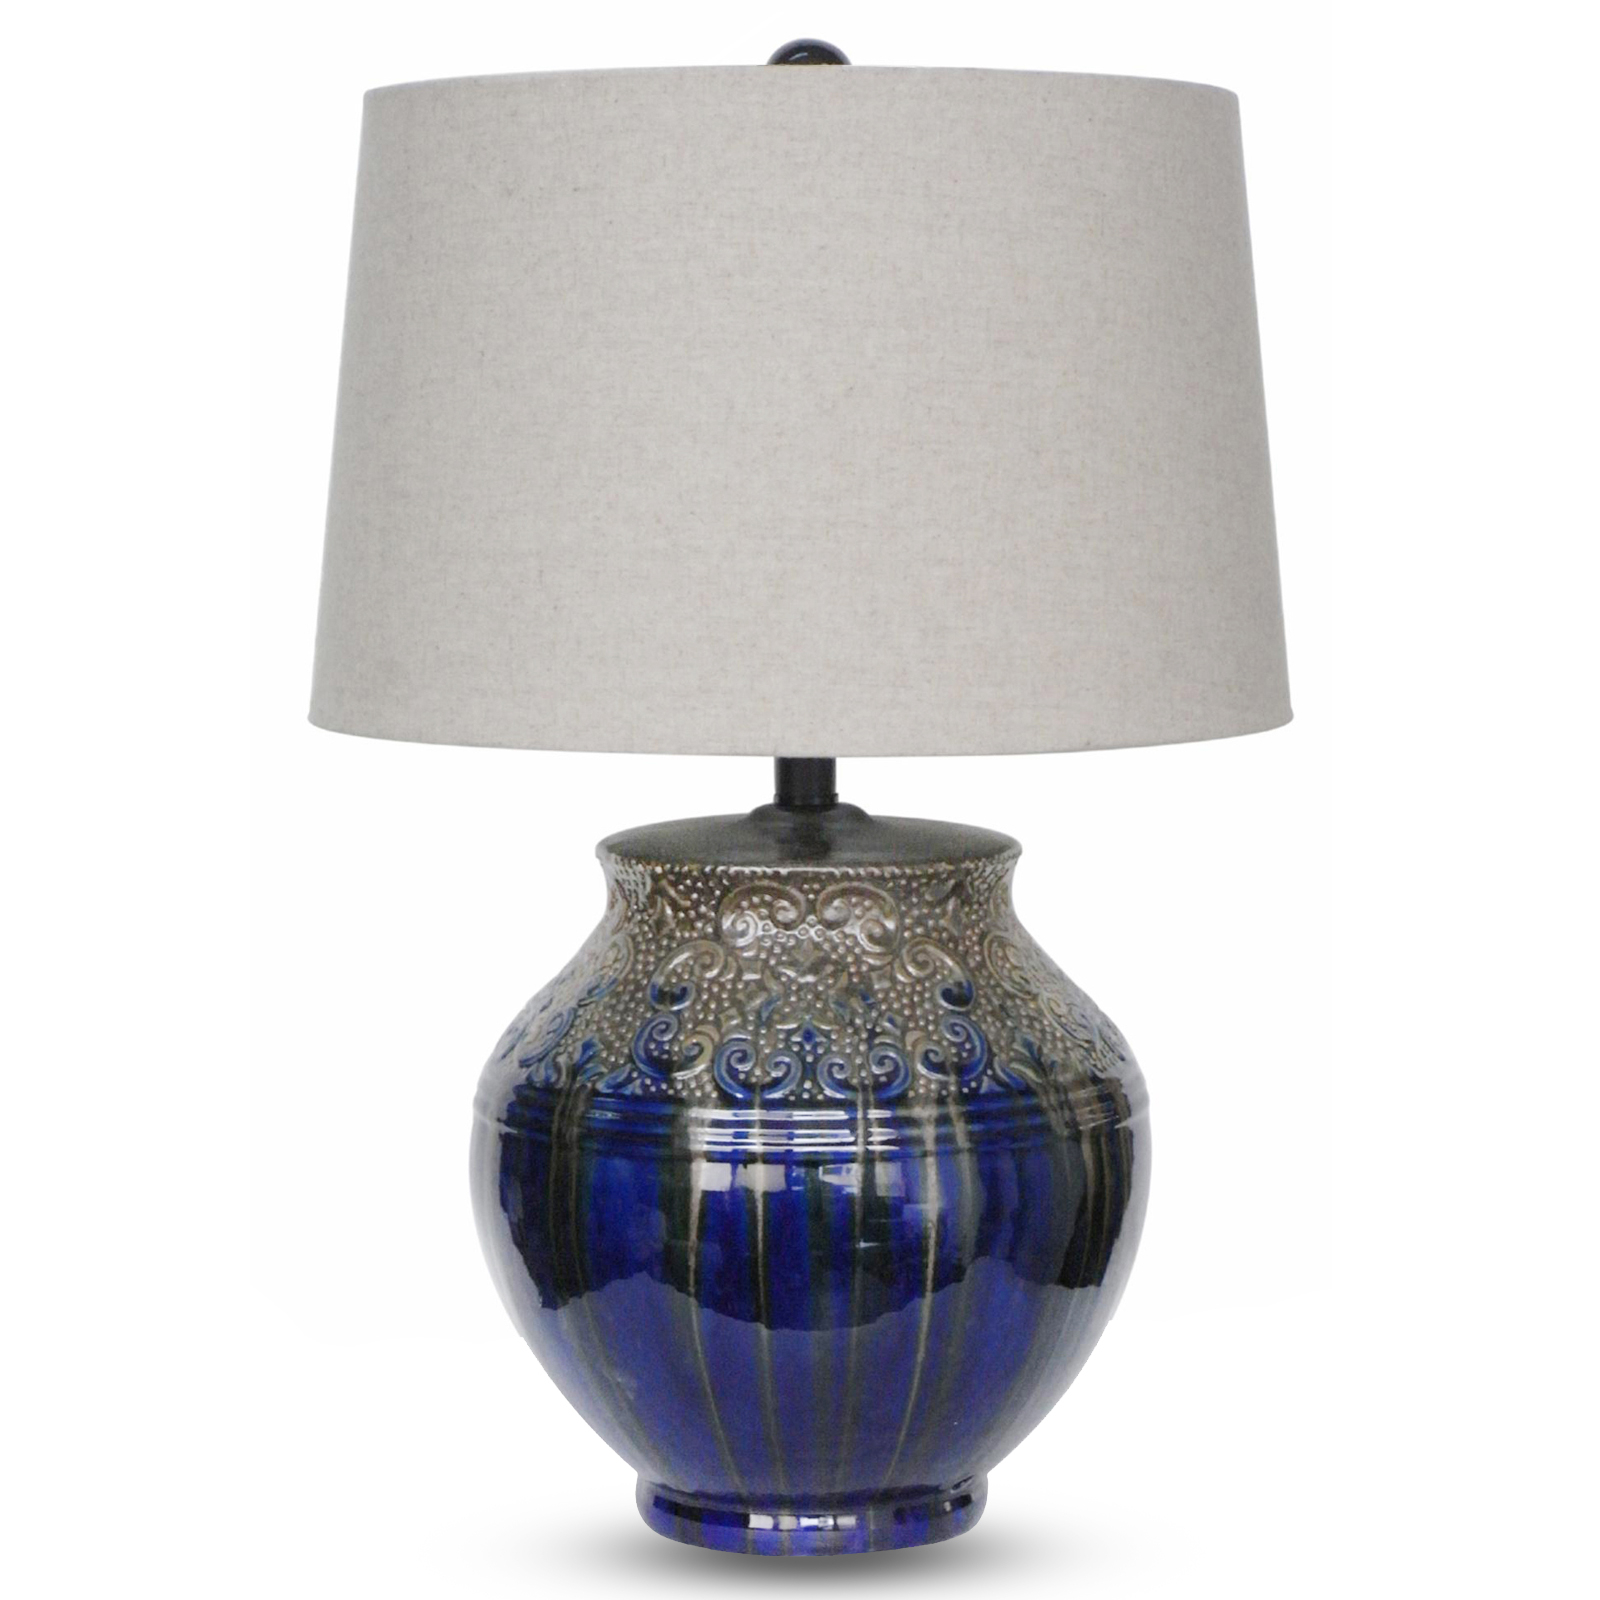 Ceramic table lamp with textured scrolling details and a metallic